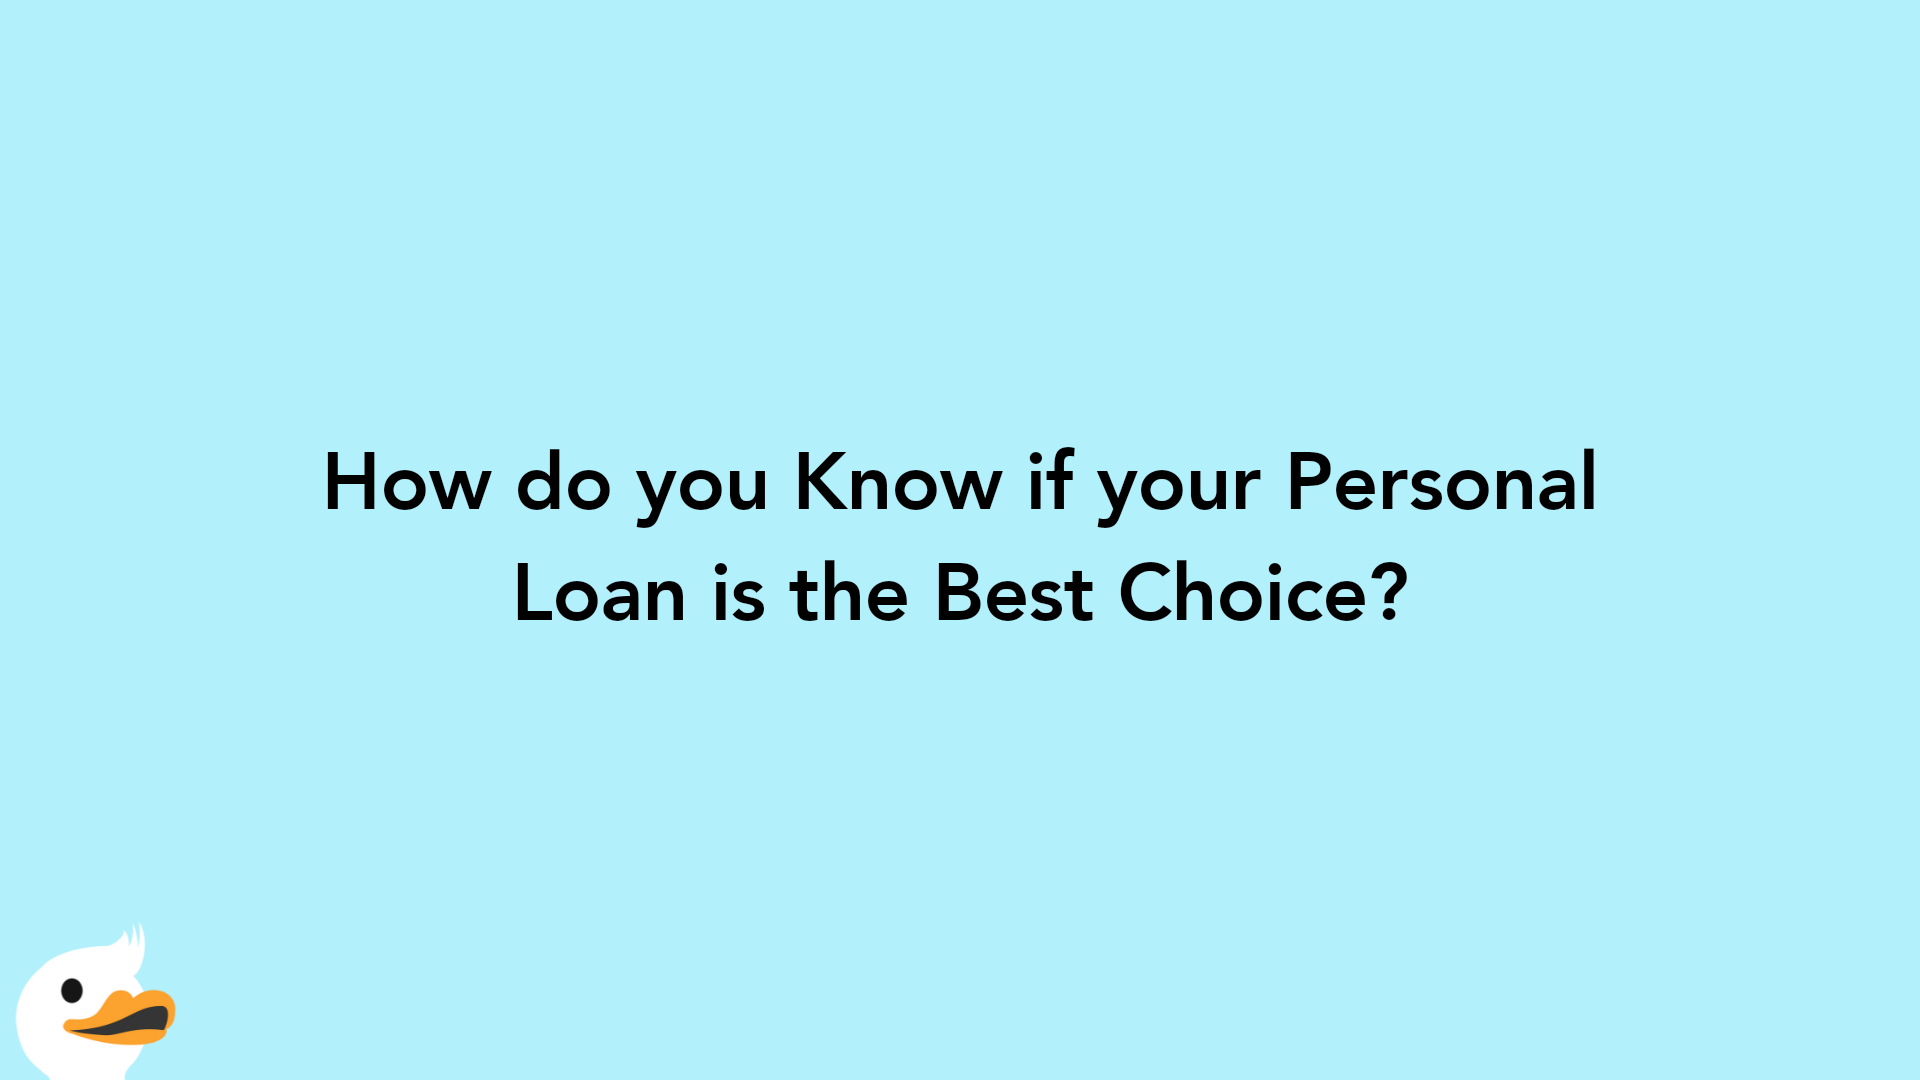 How do you Know if your Personal Loan is the Best Choice?